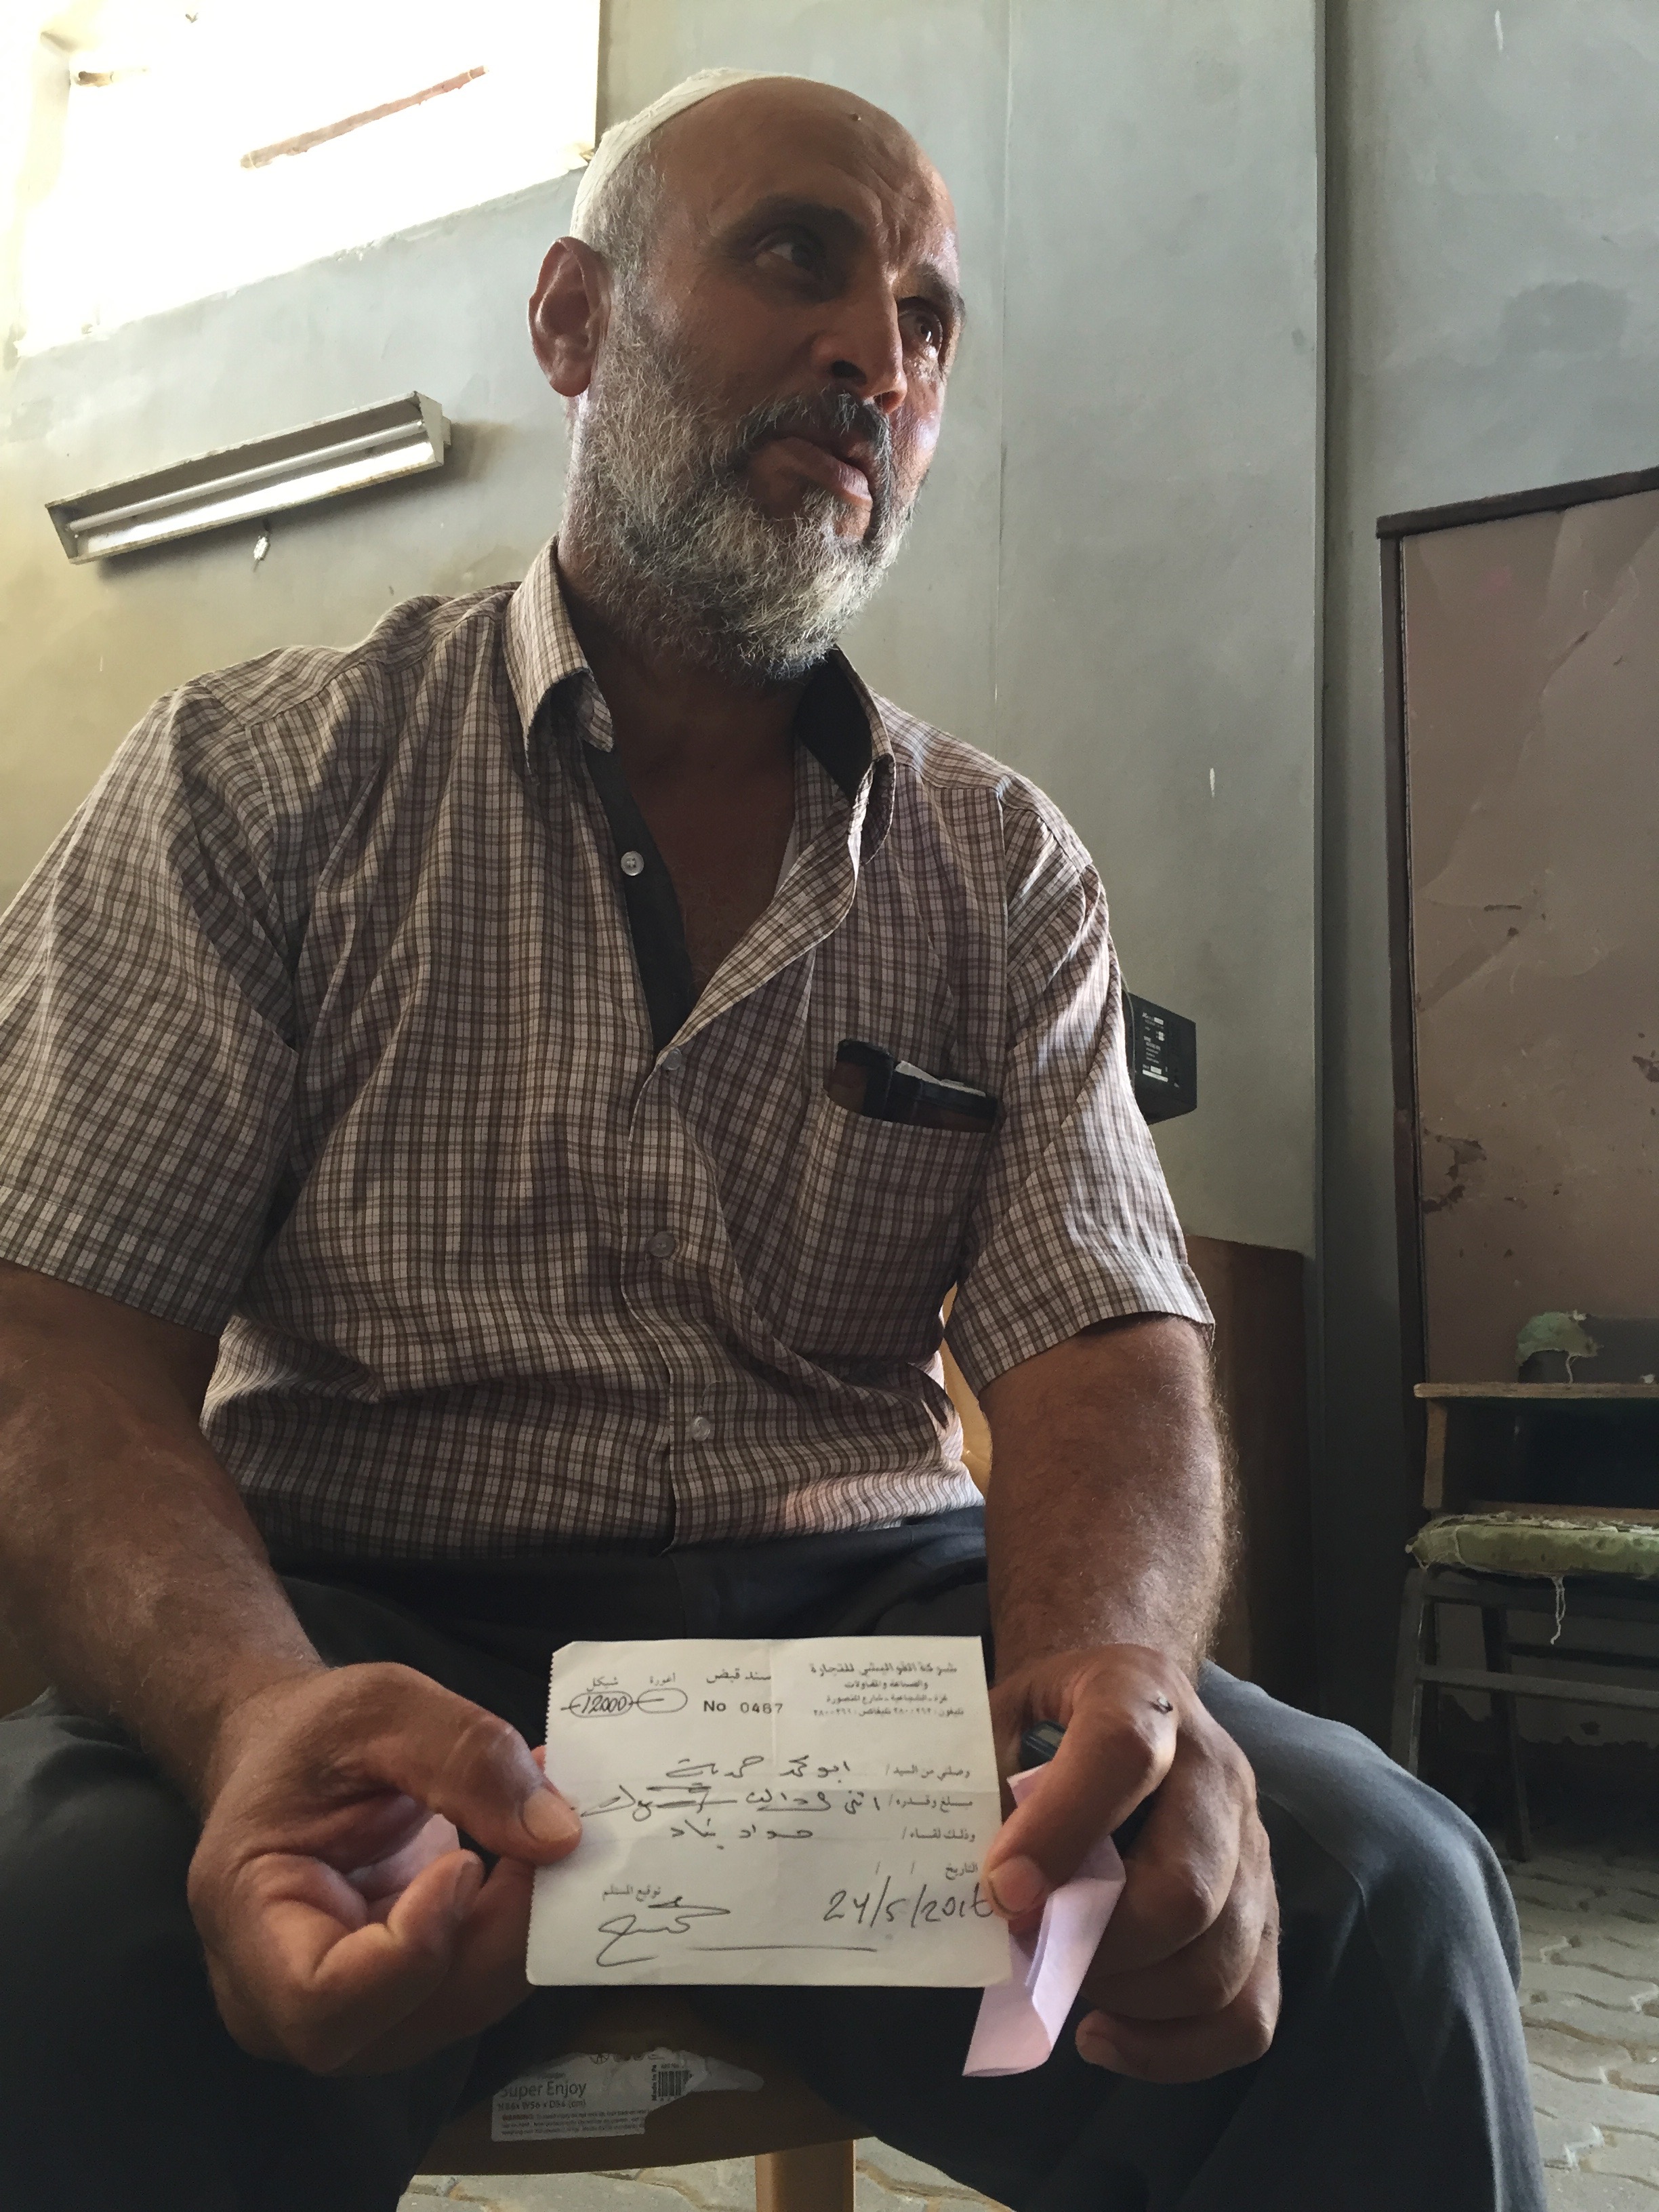  SHUJAYA | Moussa's entire four-storey home was destroyed during the 2014 Gaza war. He shows us a receipt proving he paid the money acquired from a Kuwaiti reconstruction fund to a cement provider in Gaza, but he says he is still waiting for the deli